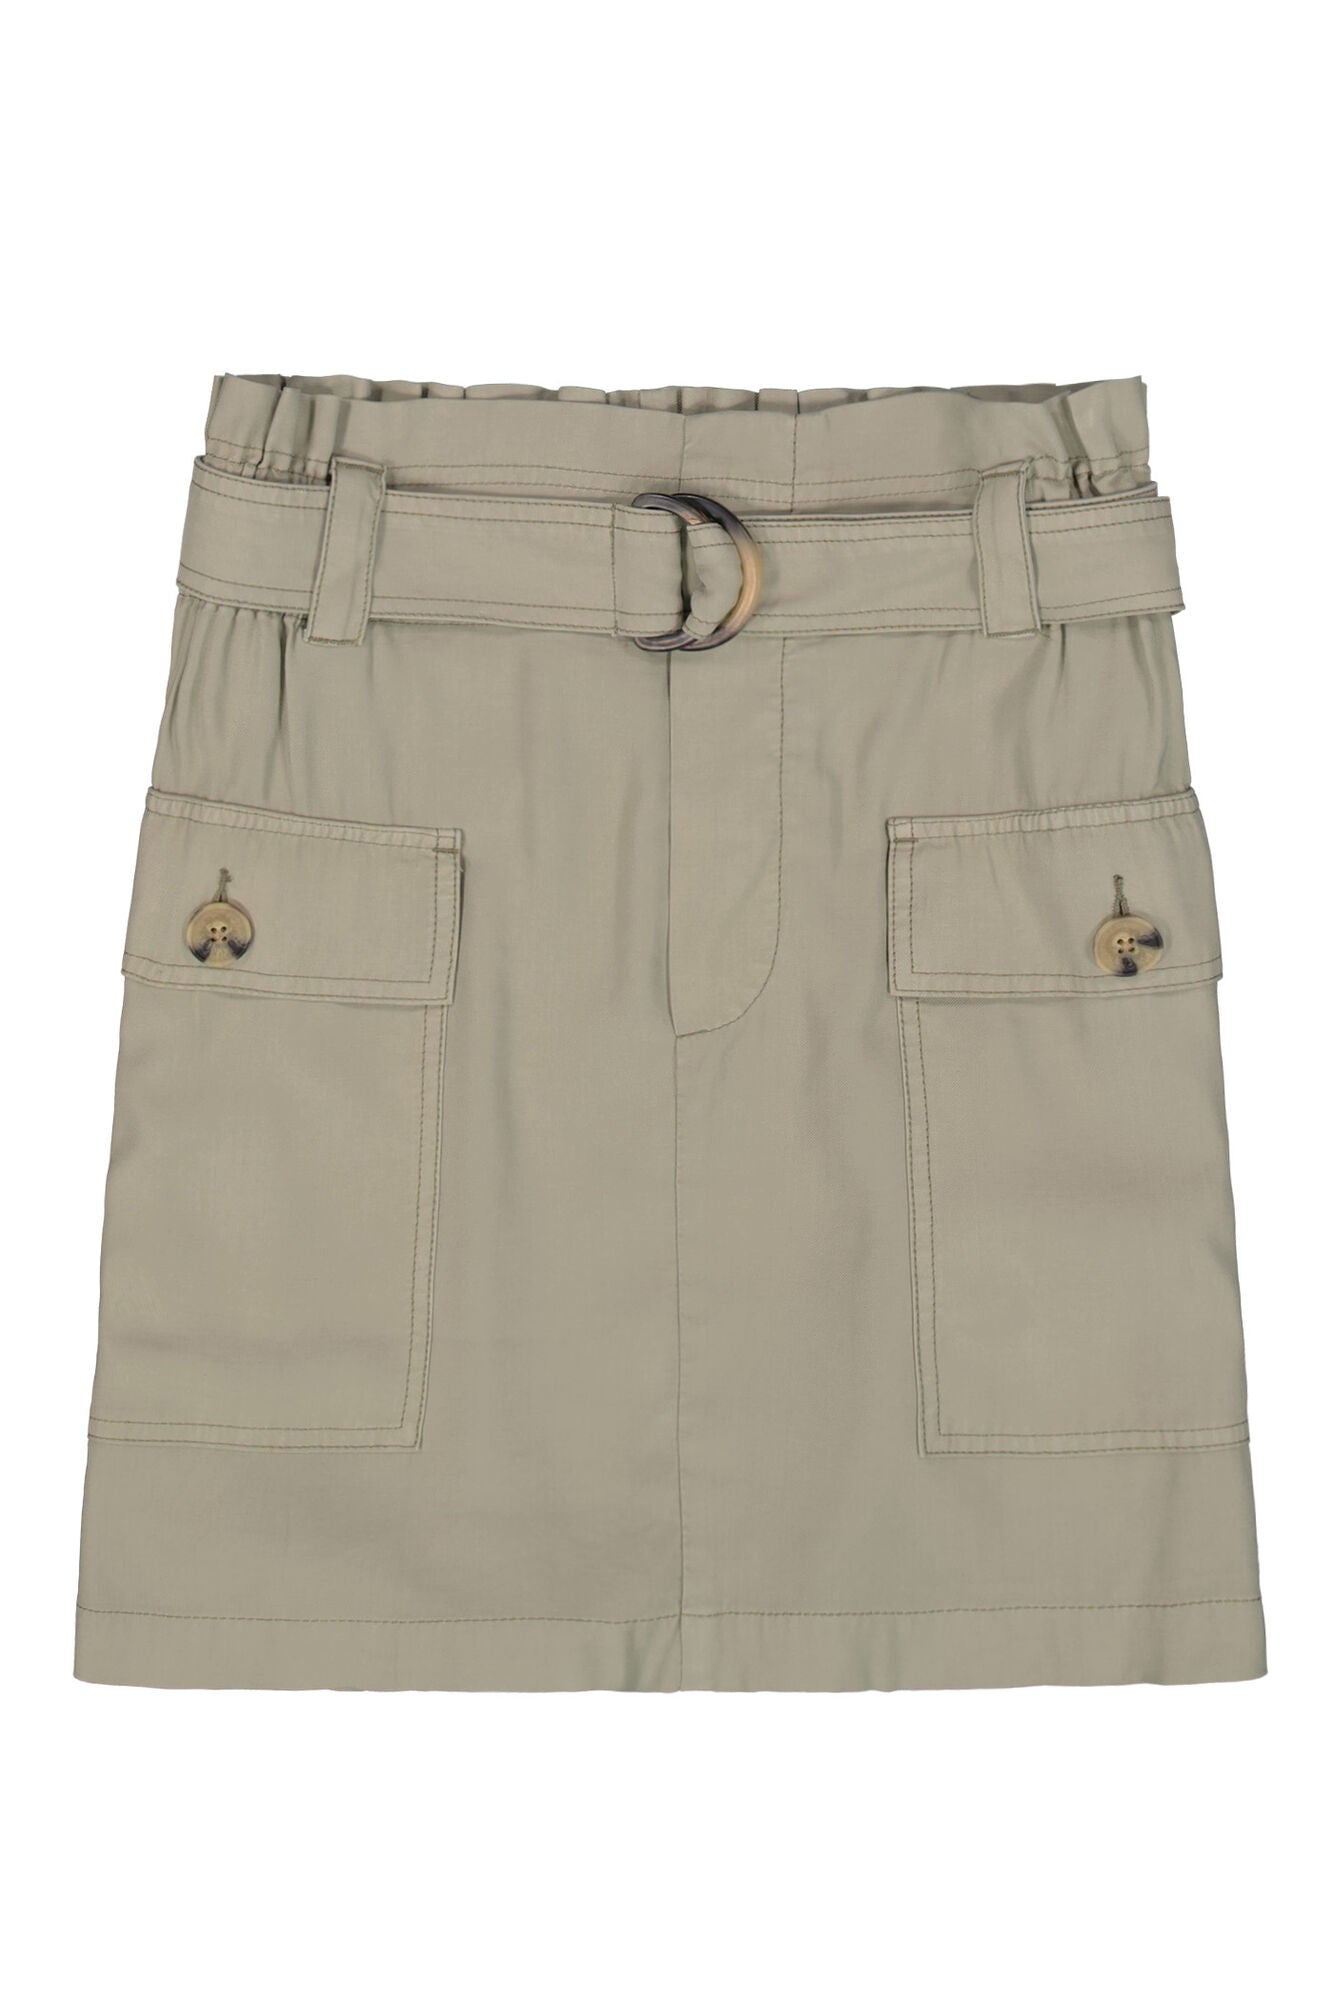 Garcia (Q40122) Women's High Rise Paper Bag Waist Mini Skirt with Two Front Cargo Pockets in Seagrass Khaki Green